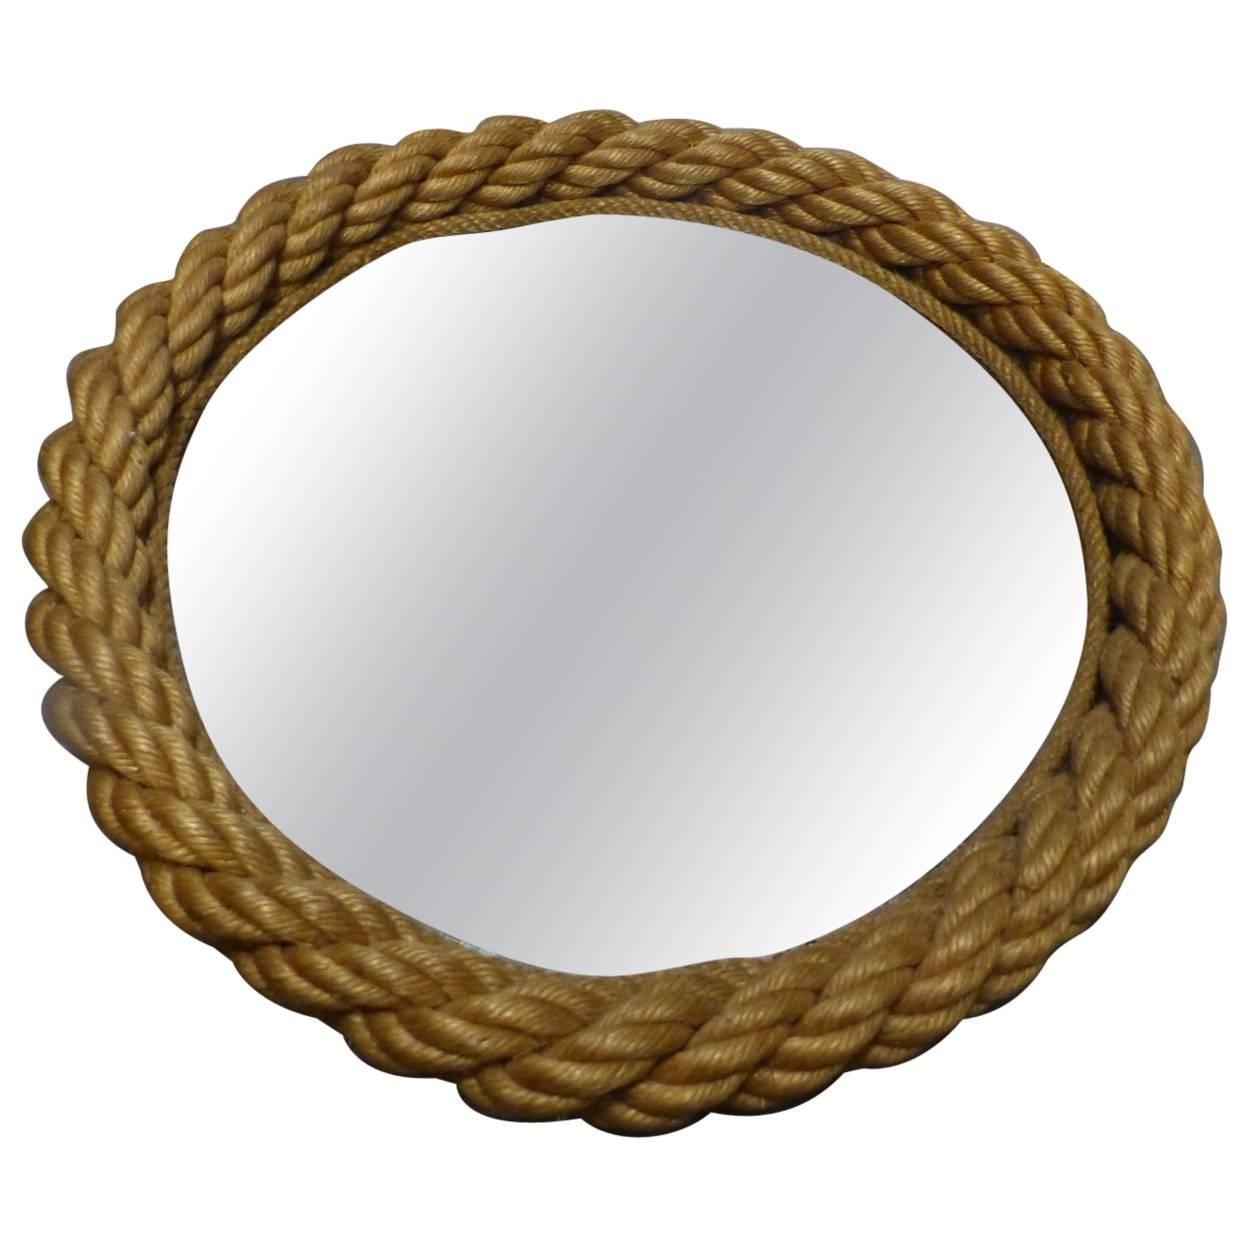 Beautiful Adrien Audoux and Frida Minet Rope Round Mirror, circa 1960 For Sale